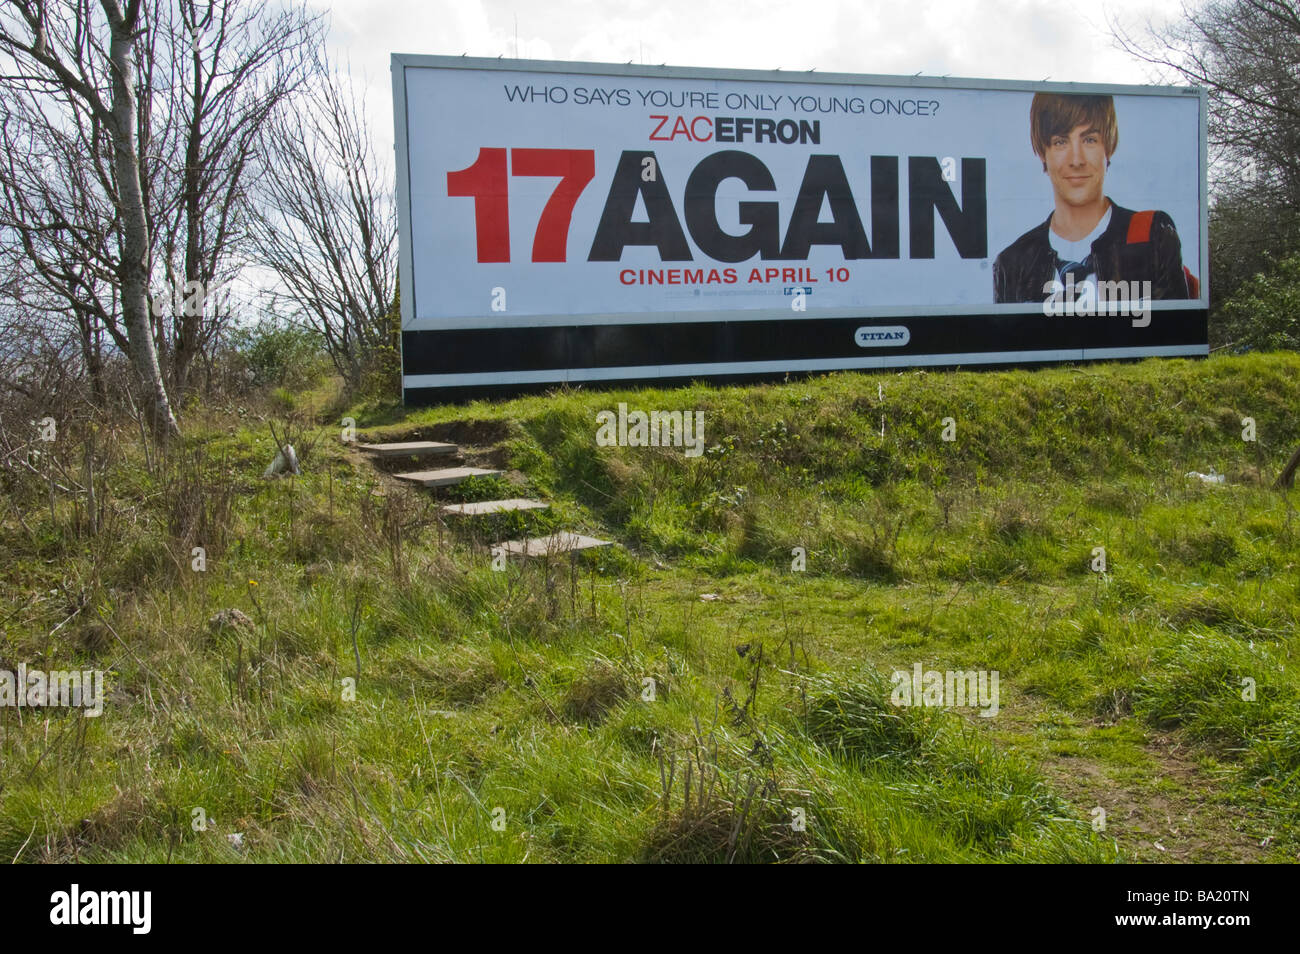 Titan advertising billboard for film 17AGAIN with Zac Efron on waste ground in Cardiff South Wales UK Stock Photo